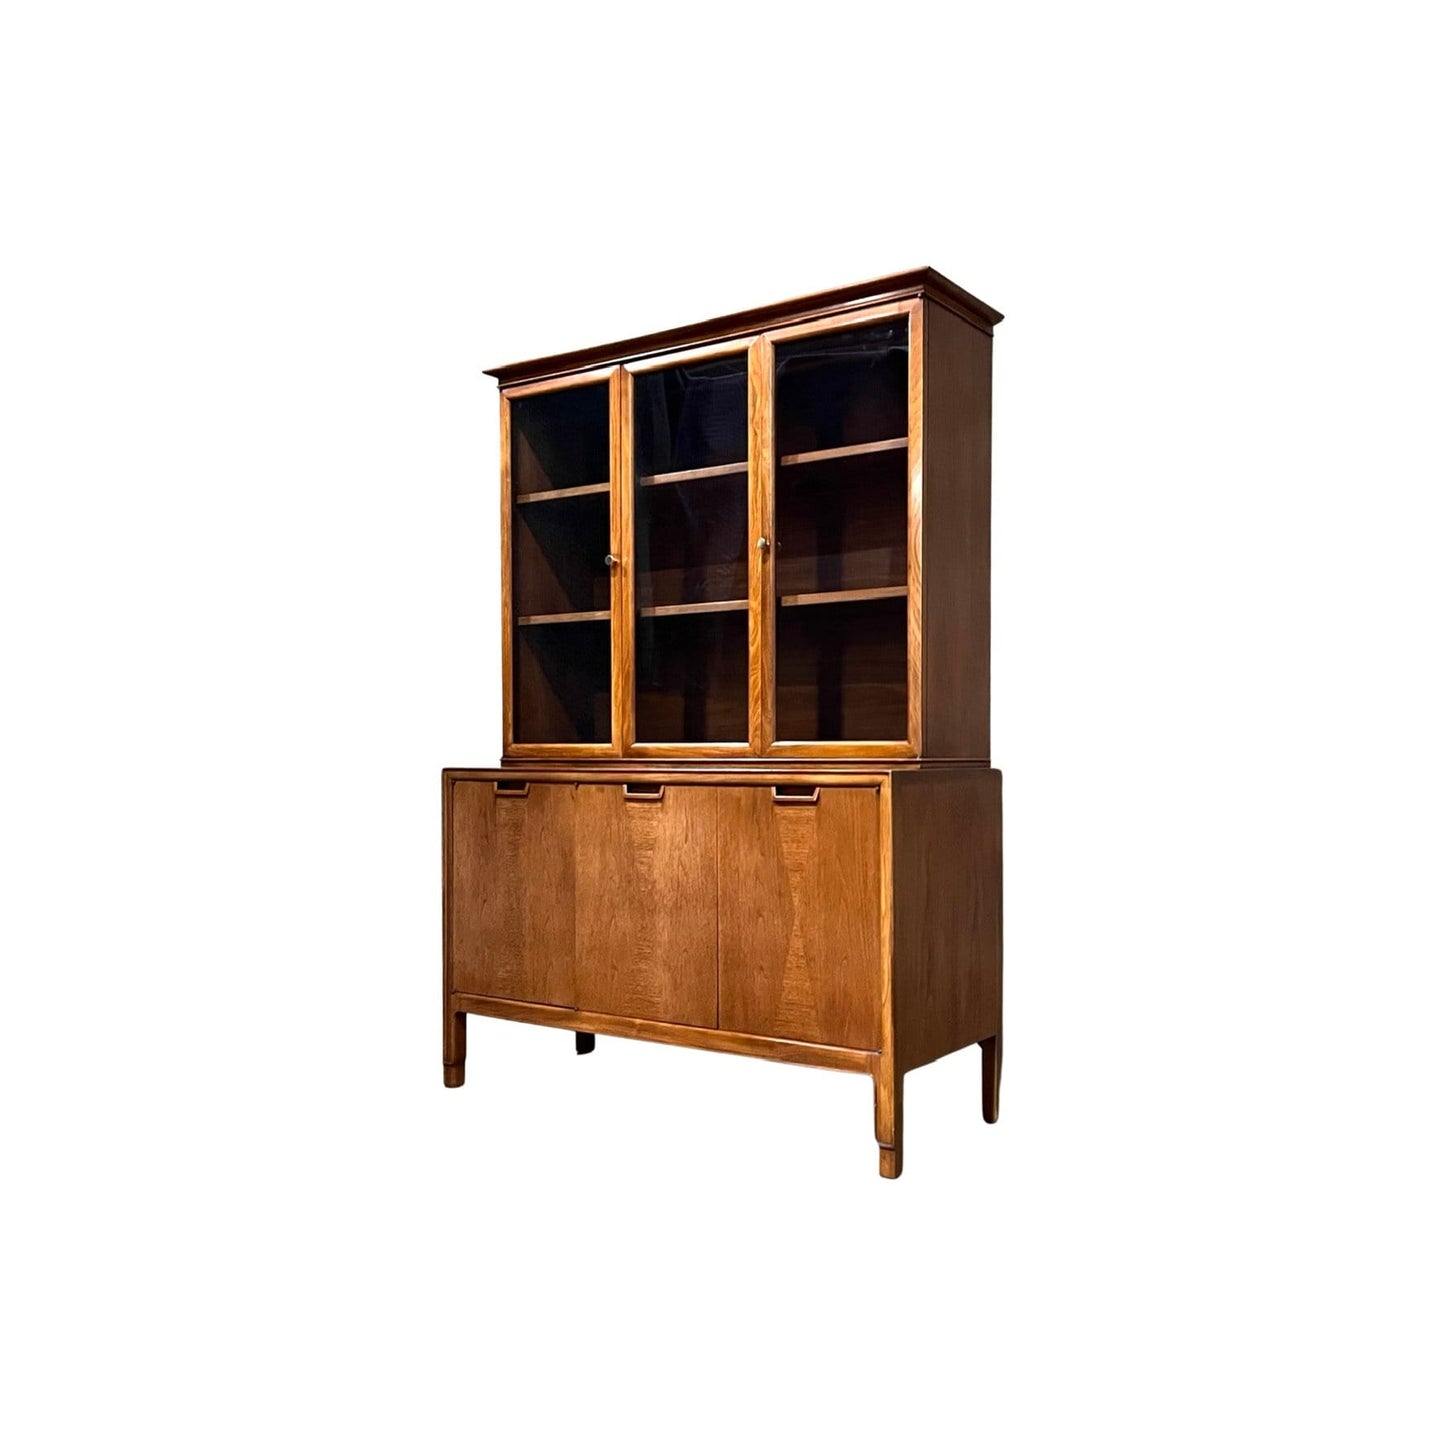 Exquisite vintage buffet and hutch showcasing hardwood construction and Parquetry pattern